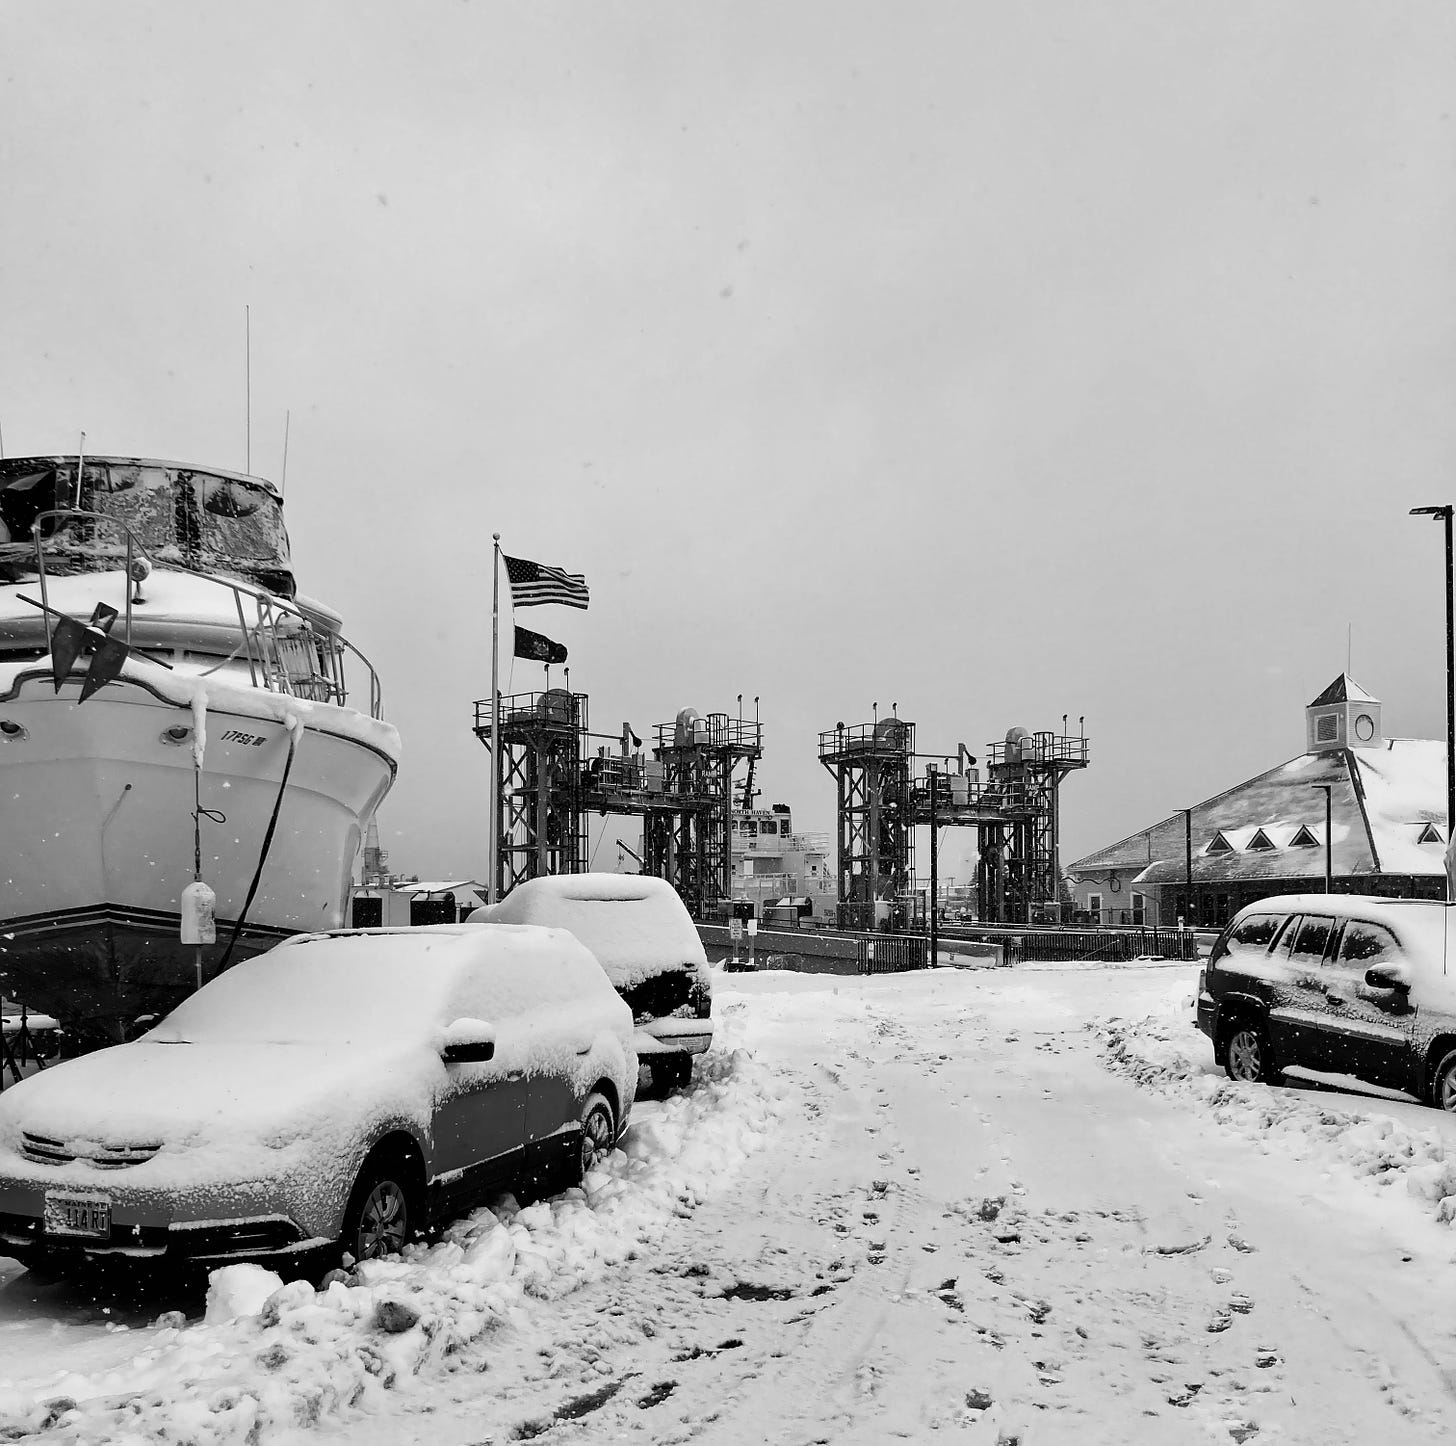 A snow scene in black and white. In the foreground are snow-covered cars and a boat, and beyond that a ferry terminal. 